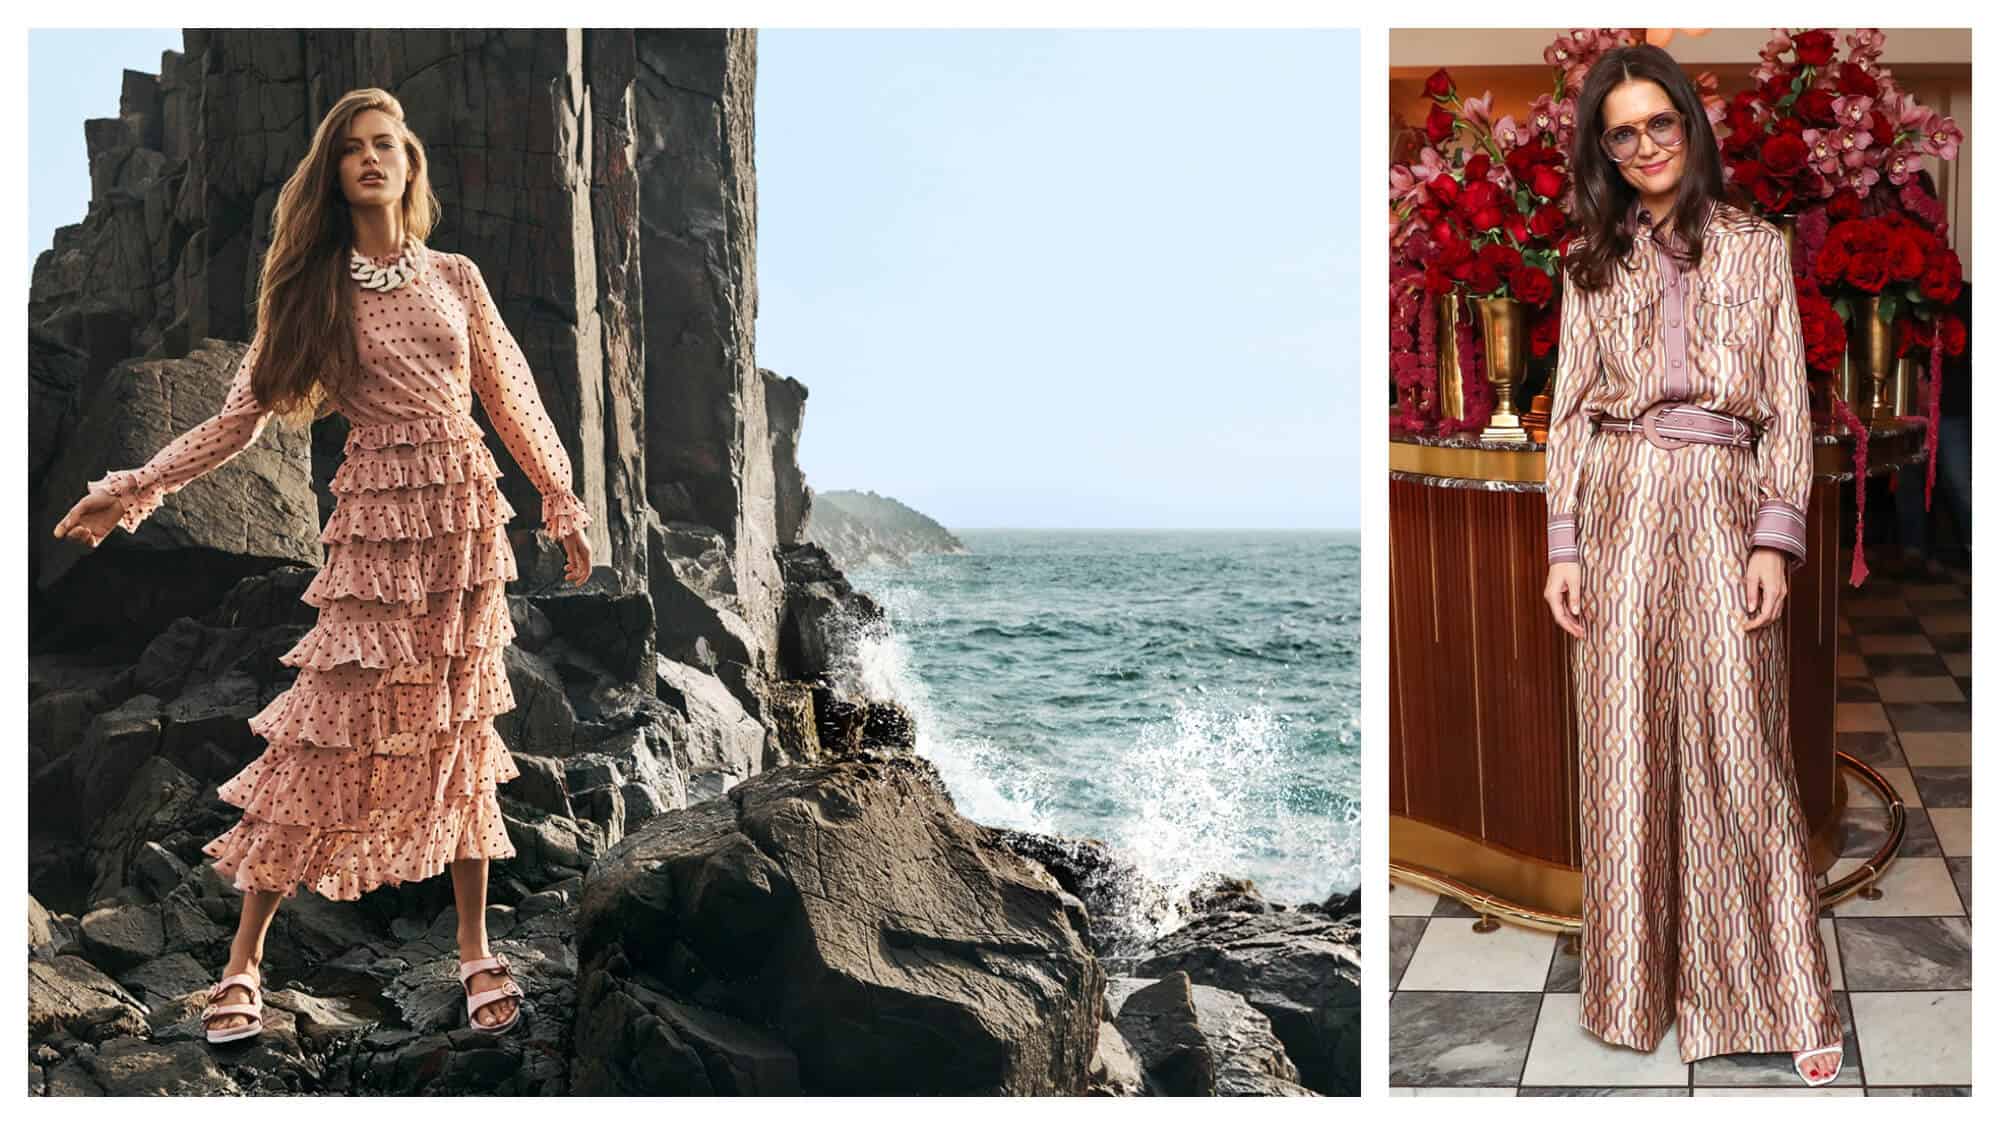 Left: a woman on rocks near the ocean wearing a long, frilly pale pink dress with black polka dots. Right: Katie Holmes in front of a bar covered with vases of flowers wearing a patterned shirt and matching pants.